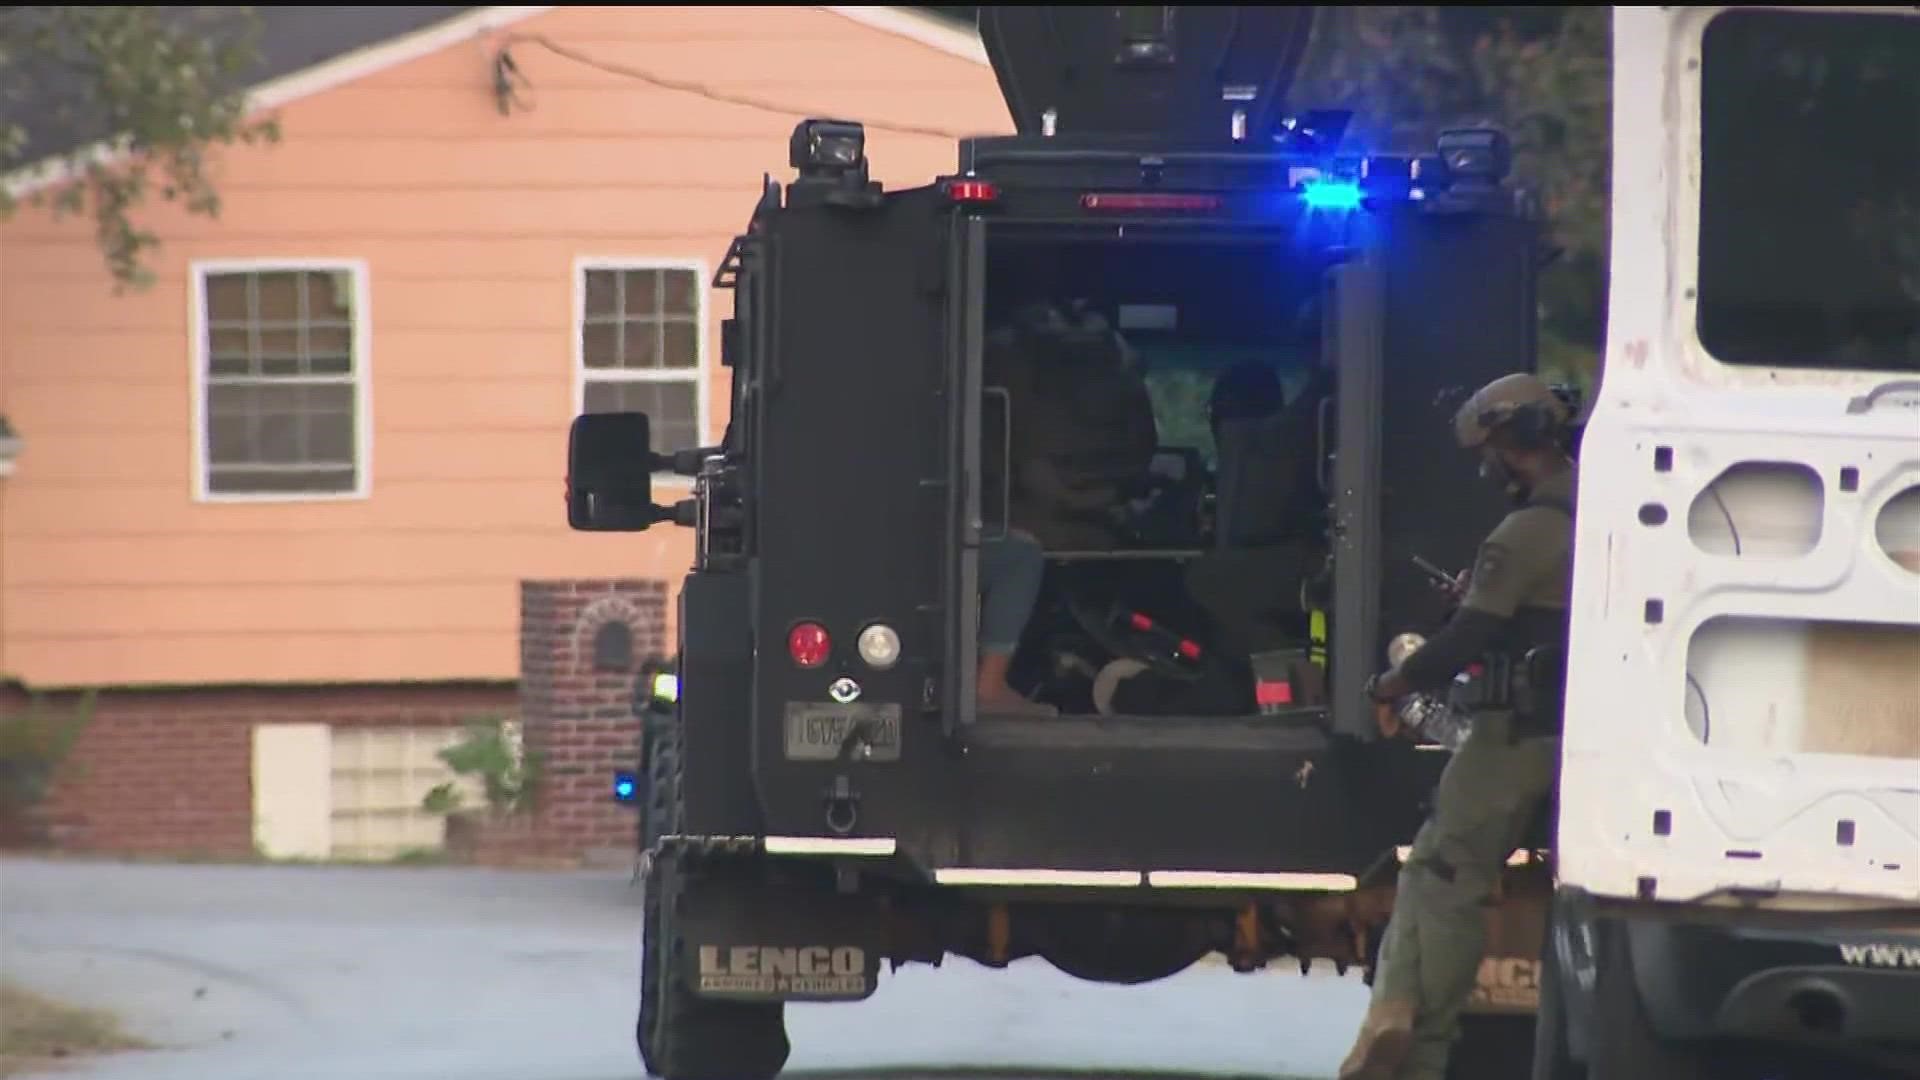 Two young girls were rescued and a 40-year-old man was taken into custody after a six-hour-long standoff in Clayton County.